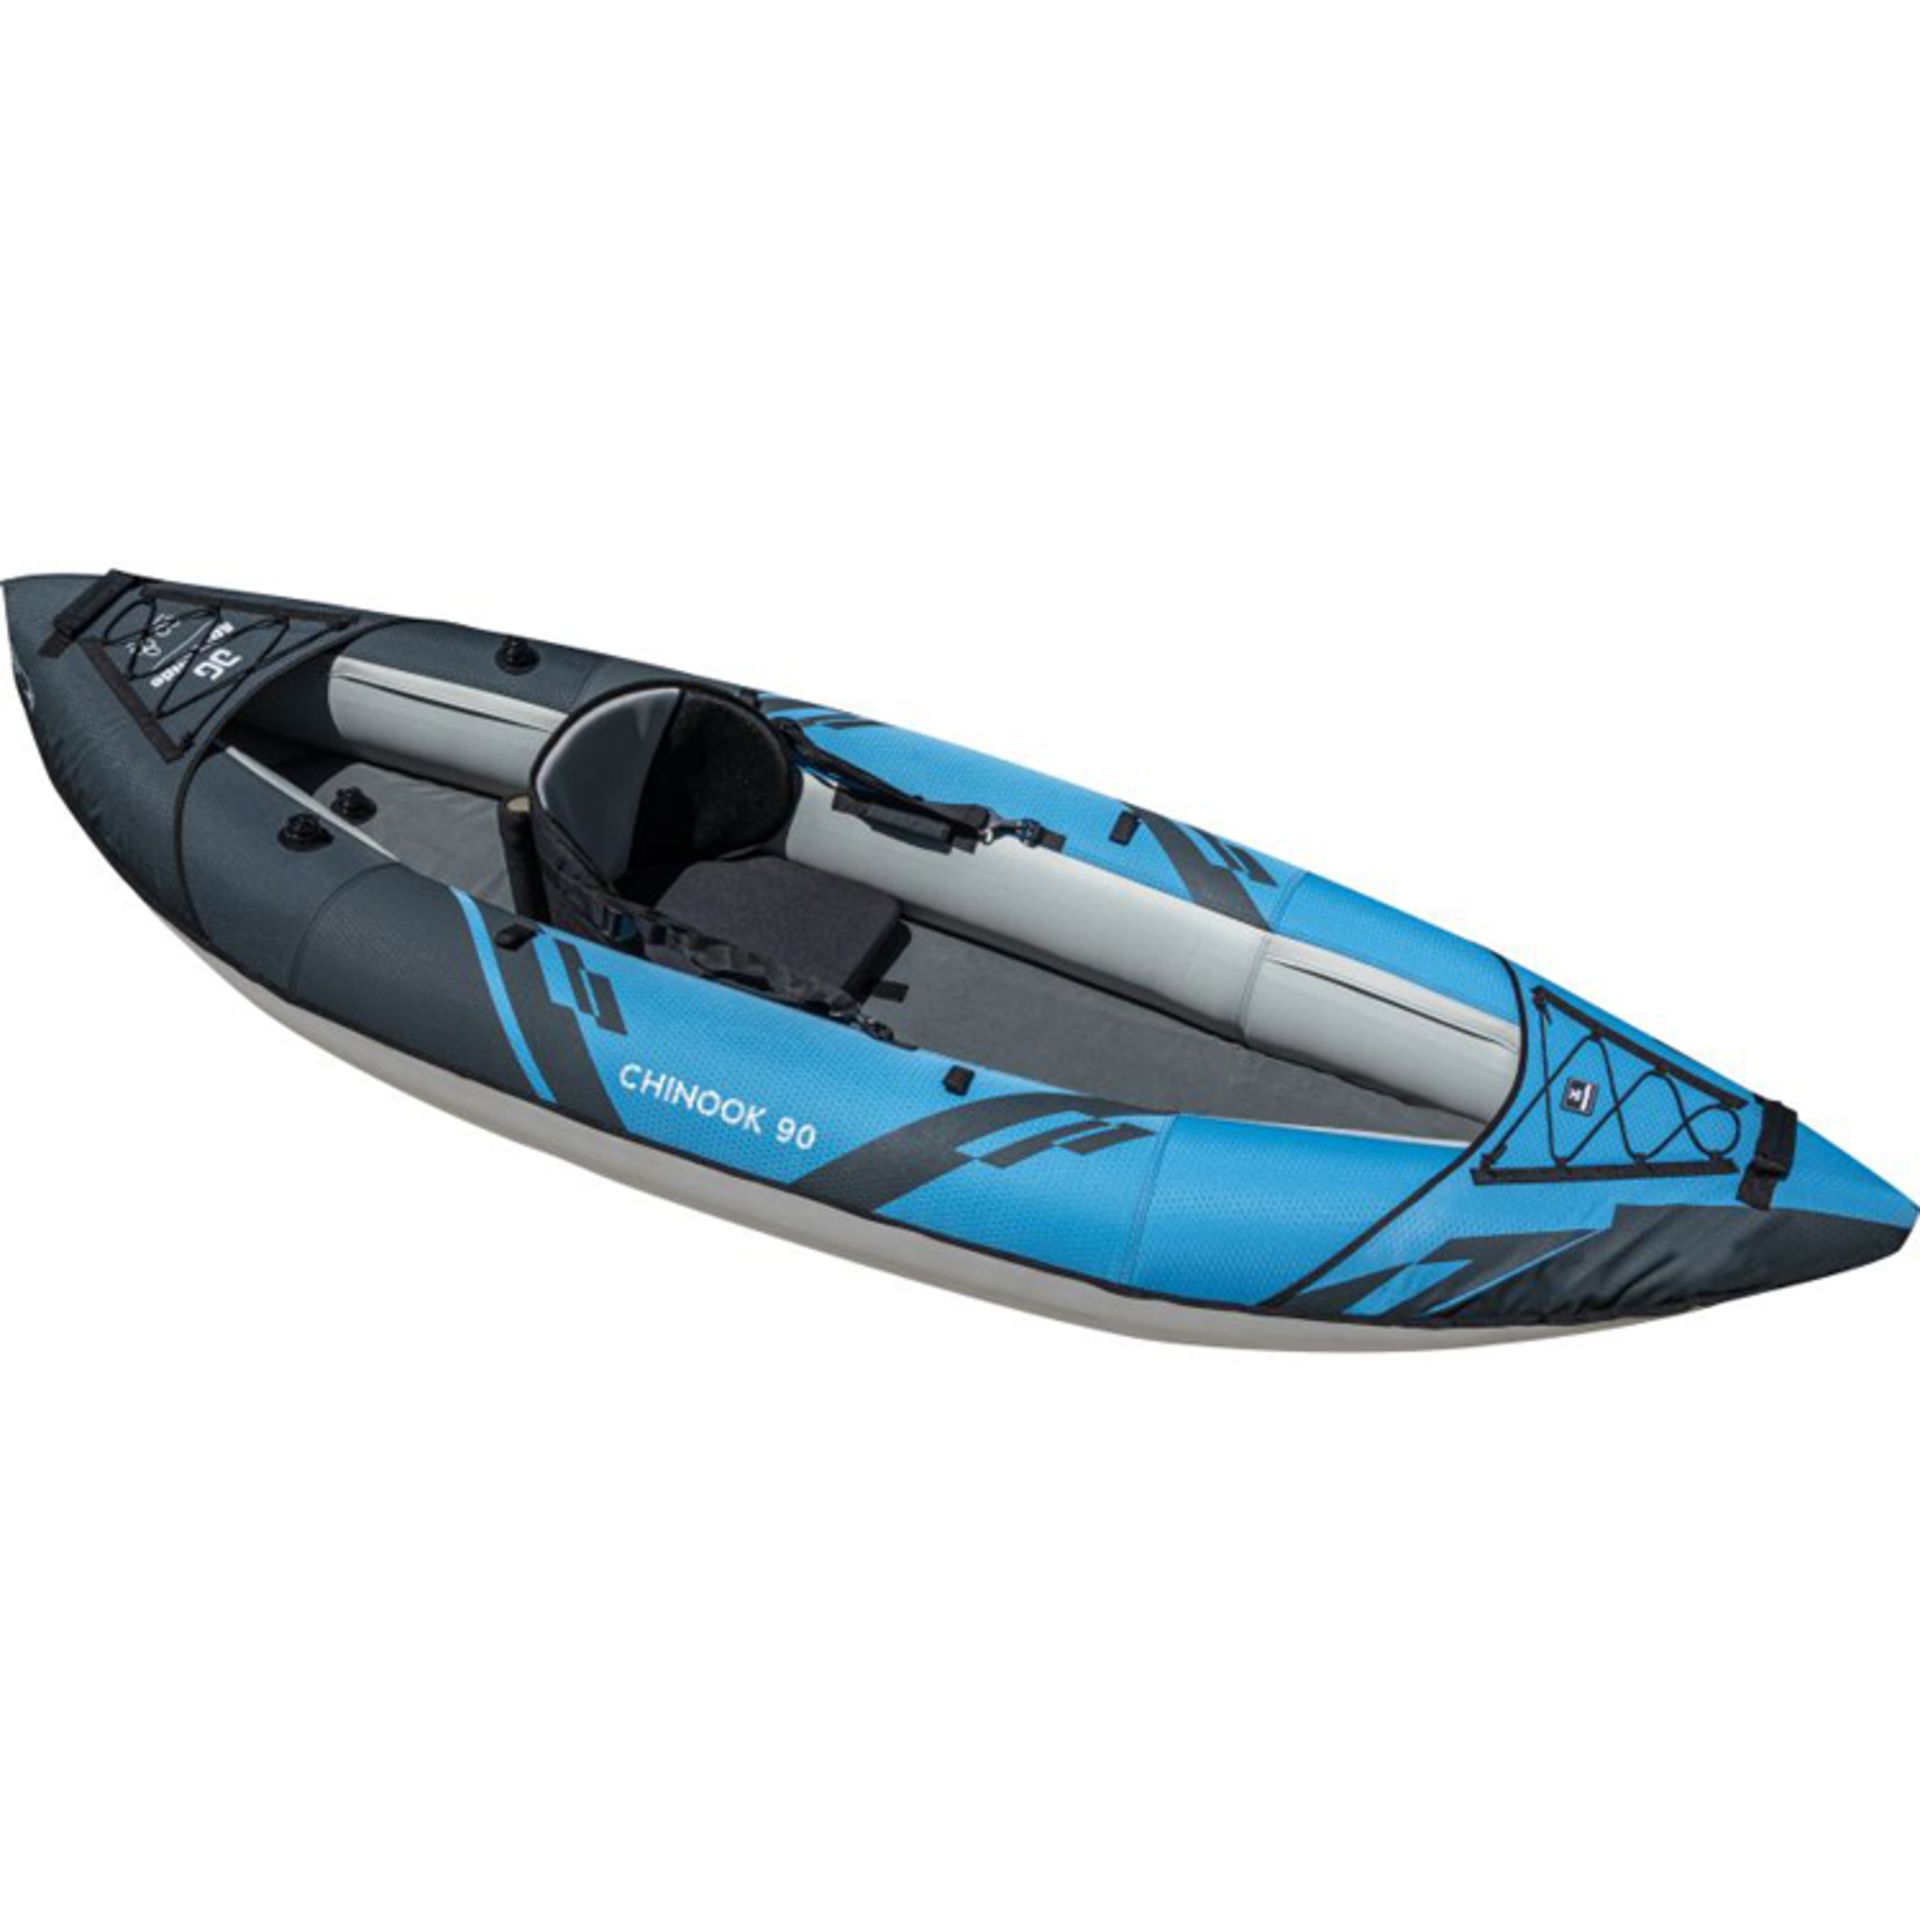 Aquaglide Chinook 90 1-Person Inflatable Recreatio - Image 2 of 2